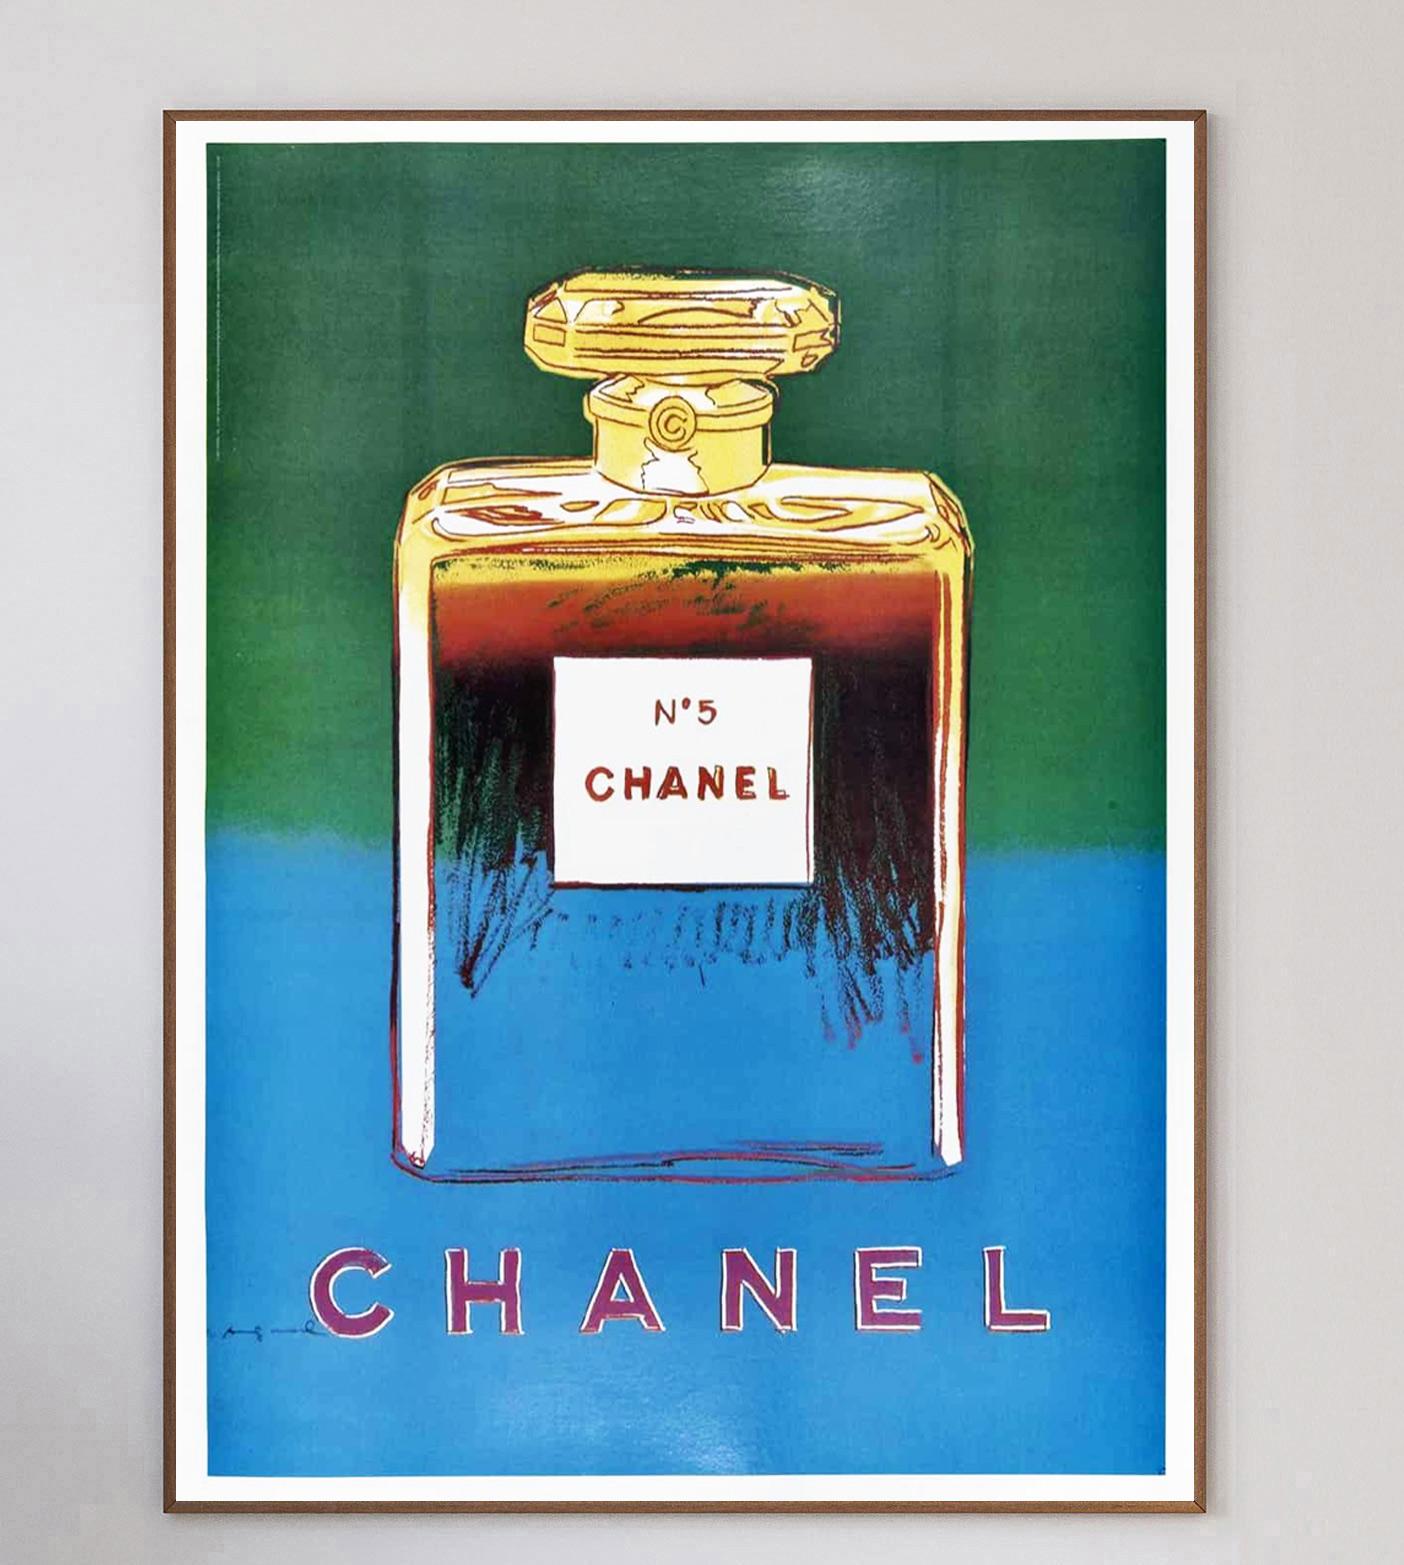 A truly iconic collaboration between Andy Warhol and Chanel no.5 began in 1985 when Warhol produced a selection of screen print artworks as part of his ADS series. The pieces were then used by Chanel as part of wider advertising campaign in 1997,